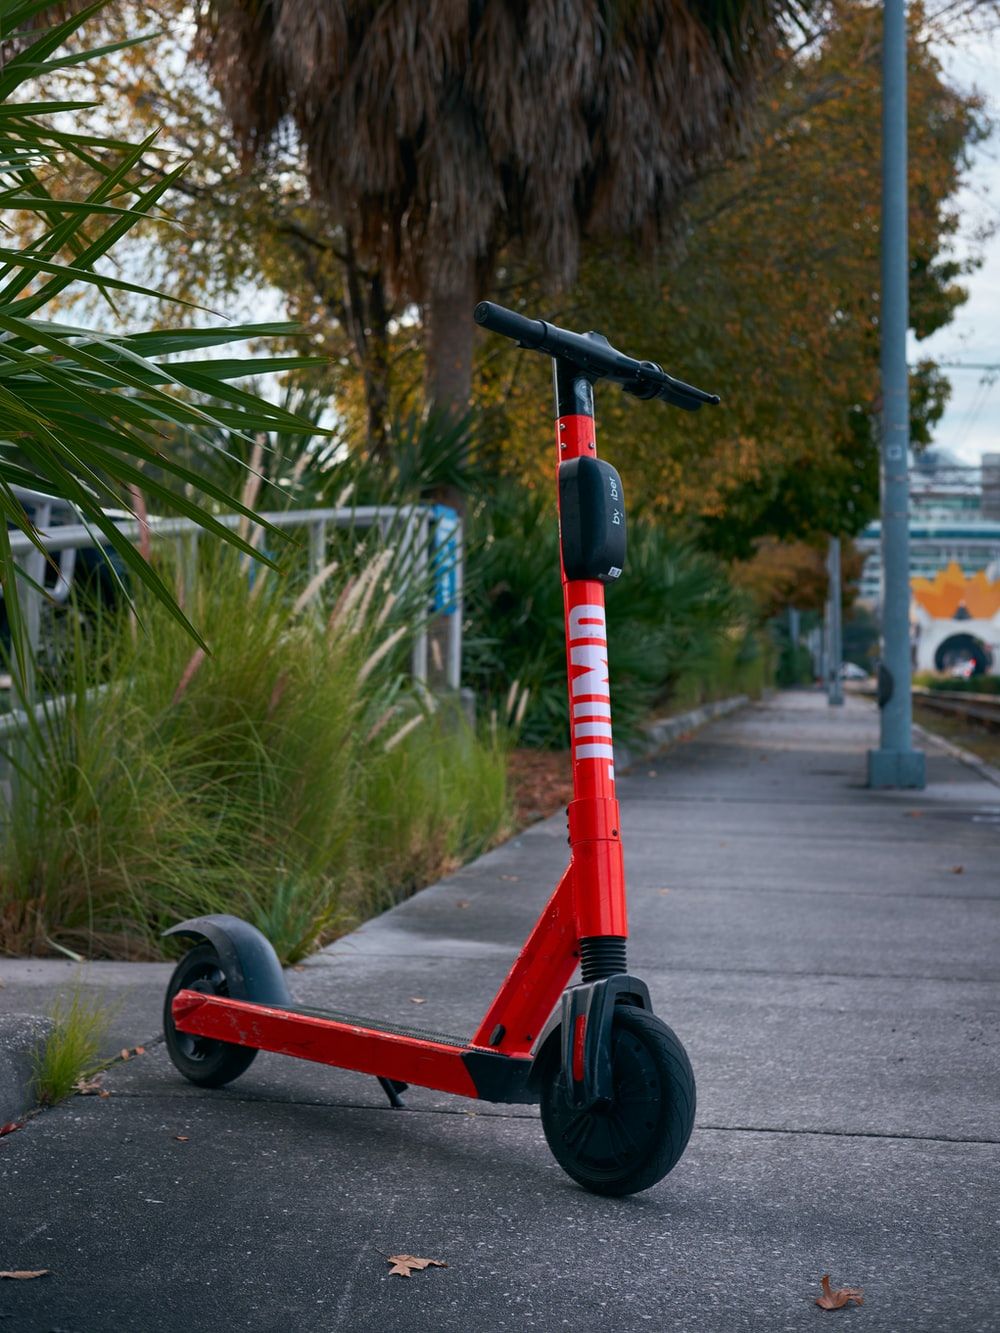 Electric Scooter Picture. Download Free Image